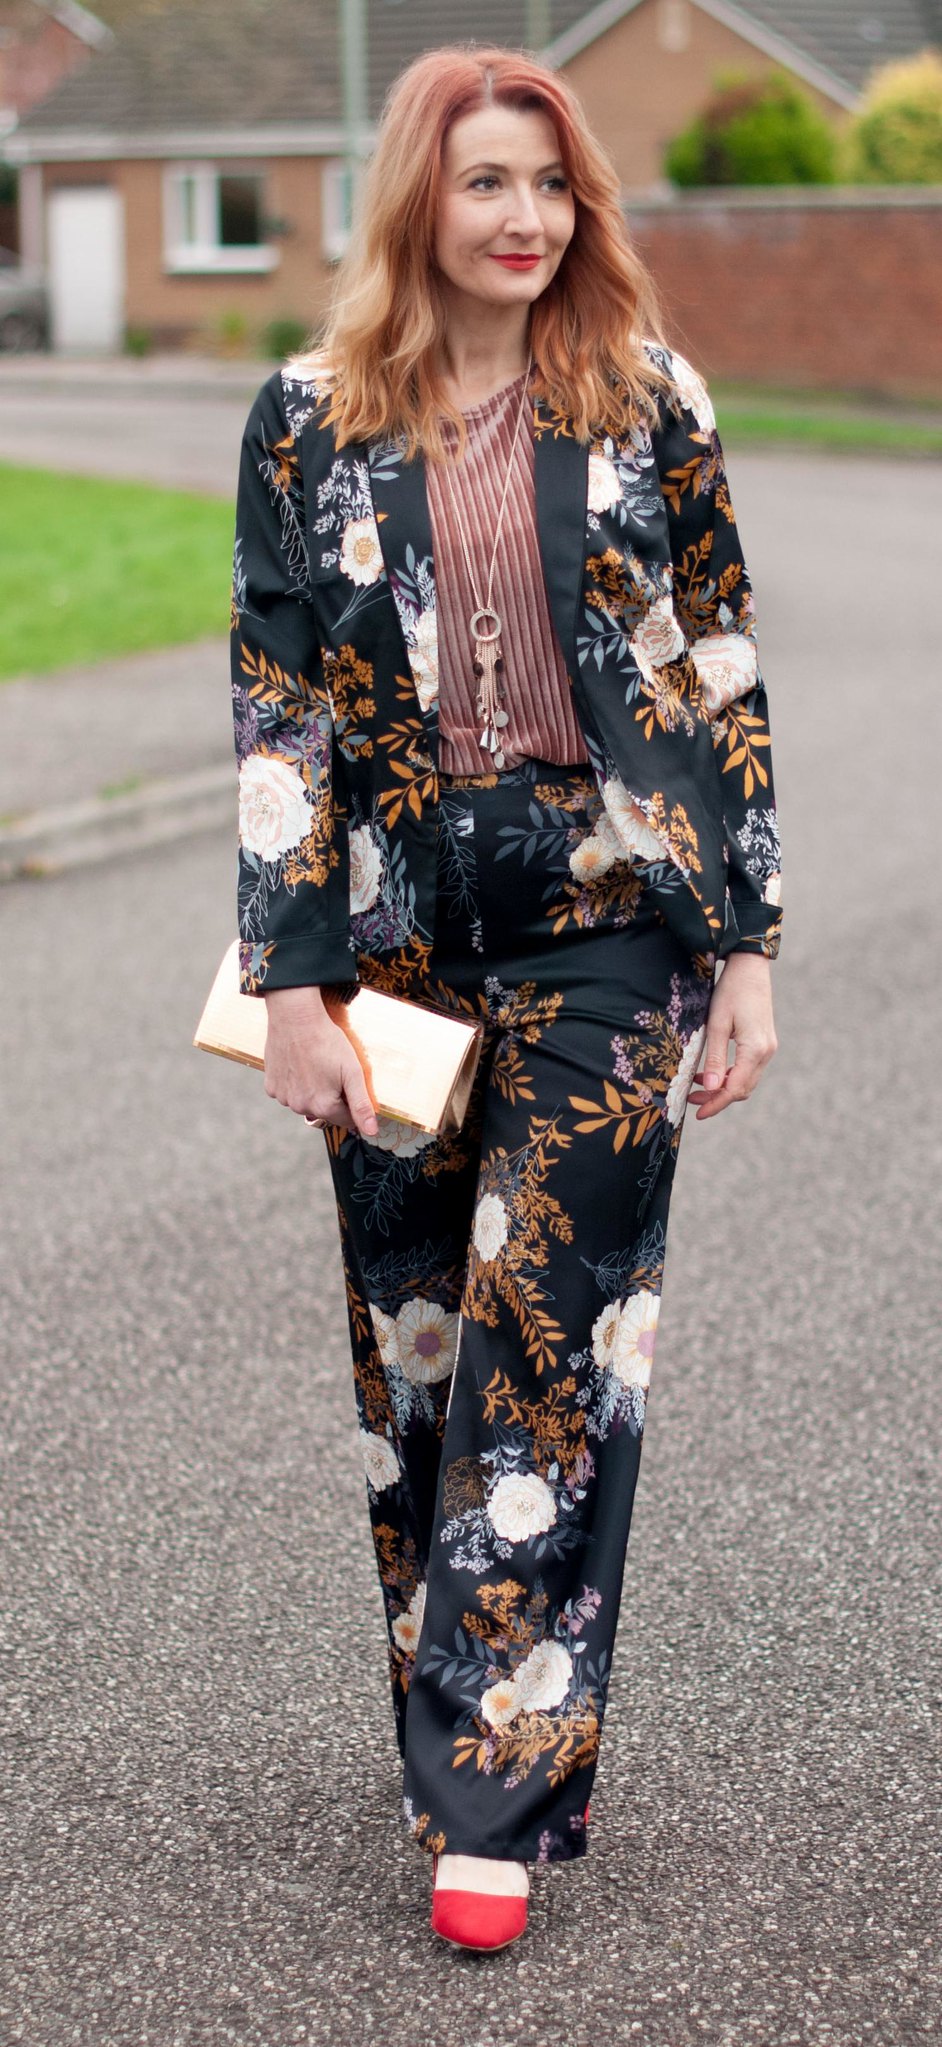 Floral pyjama pajama-style suit, Christmas party outfit: Trouser/pants suit with red heels, pink velvet top and gold mirror clutch | Not Dressed As Lamb, over 40 fashion